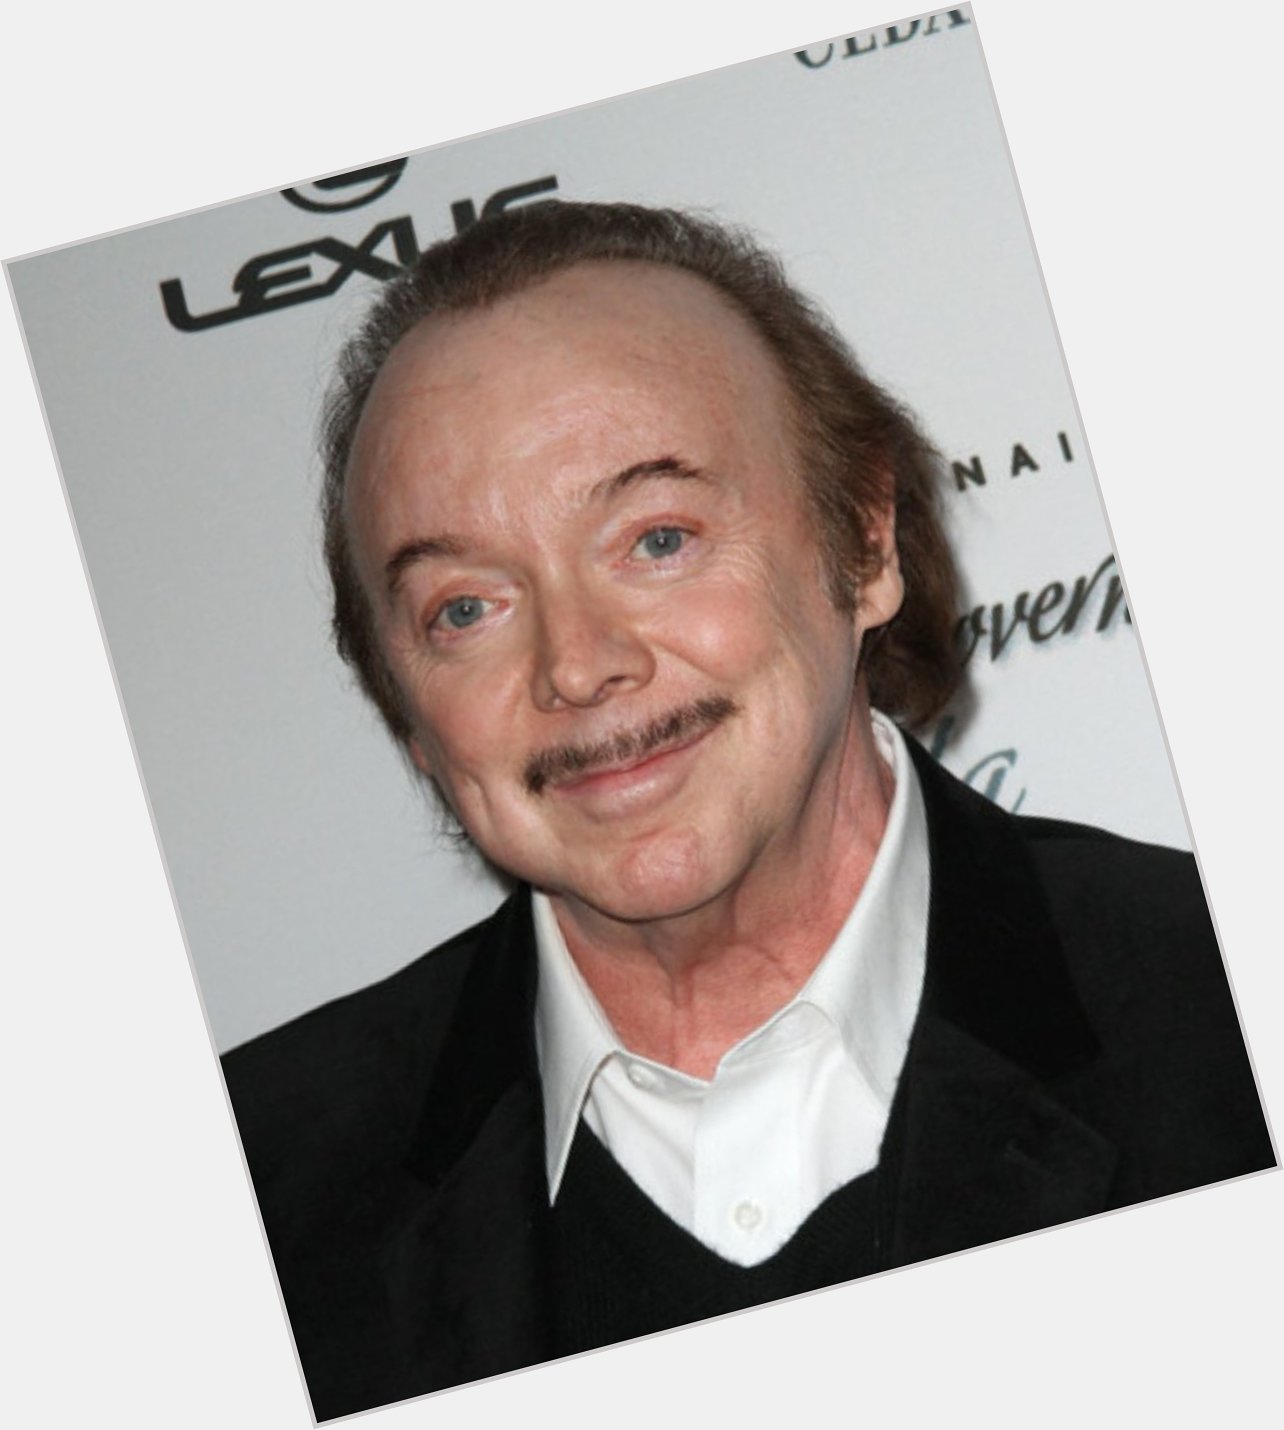 Happy Birthday to Bud Cort! the voice of The Toy Man on Superman.
Born: March 29th, 1948 